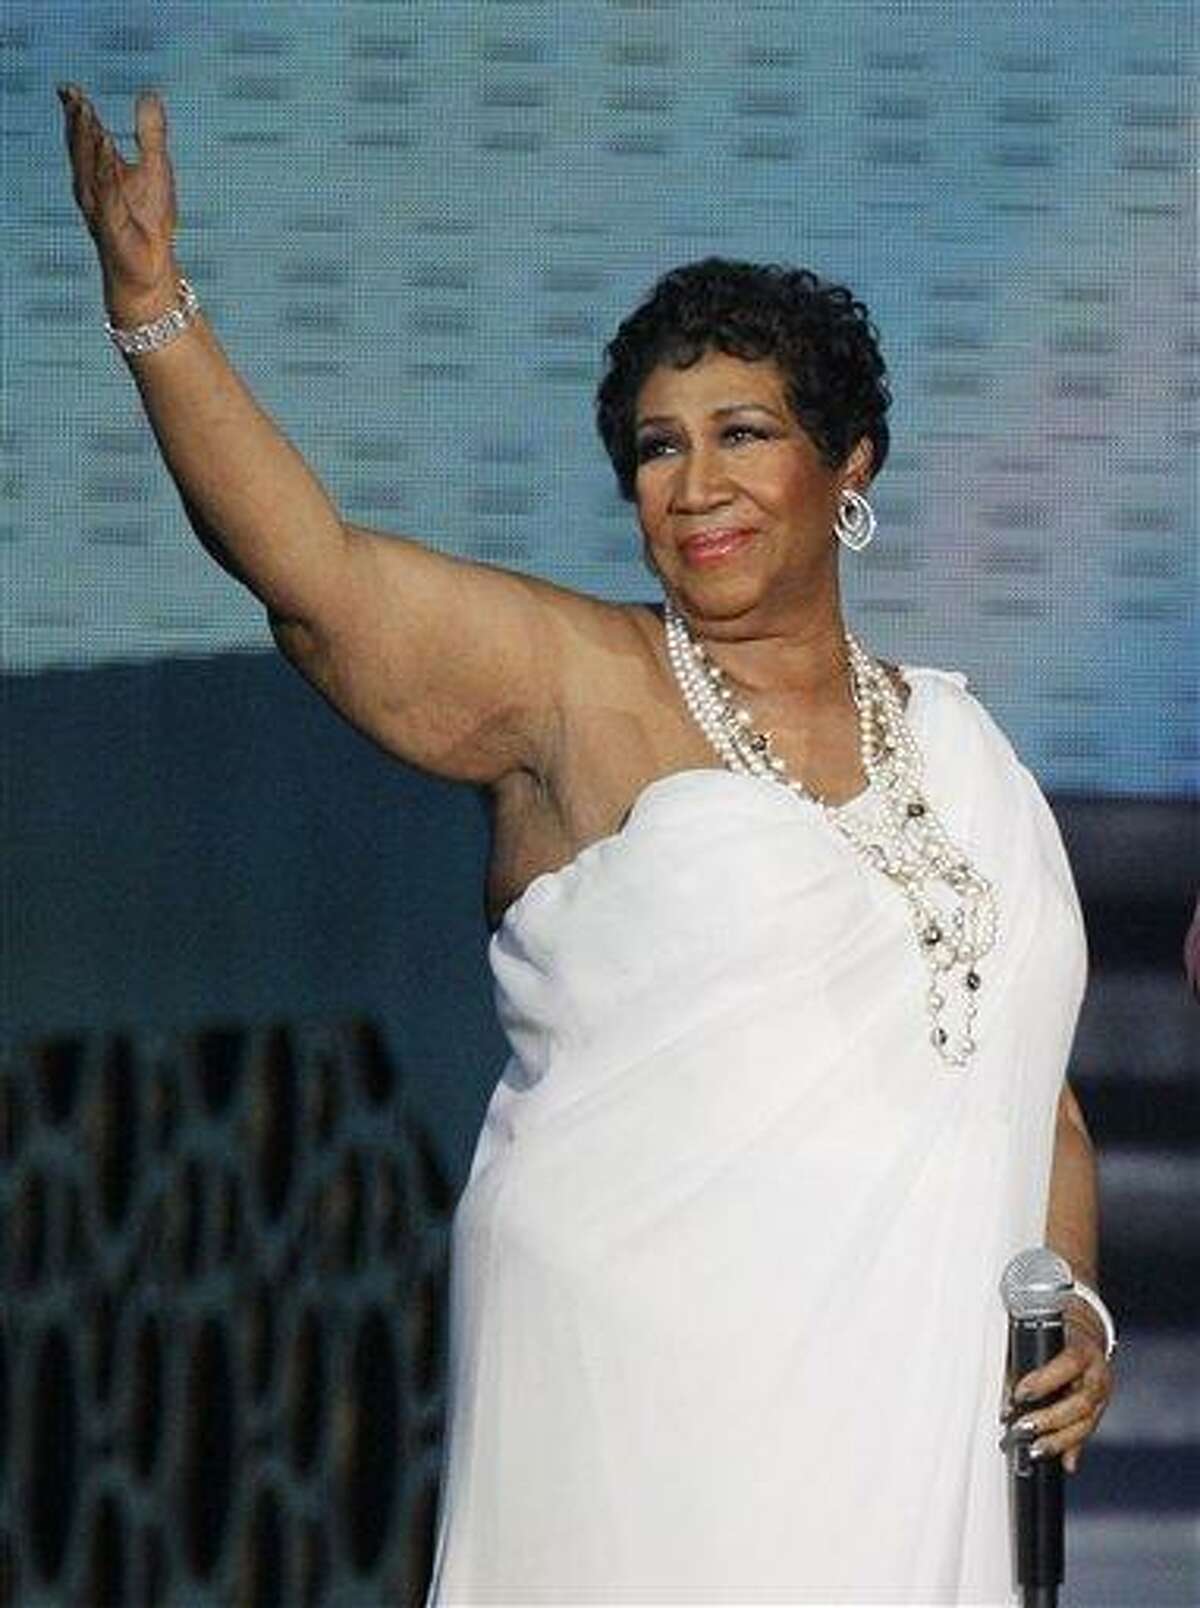 Singer Aretha Franklin appears at a taping of "Surprise Oprah! A Farewell Spectacular," in Chicago in May 2011. Franklin says the proposal from her longtime friend, Willie Wilkerson was not entirely unexpected. Associated Press